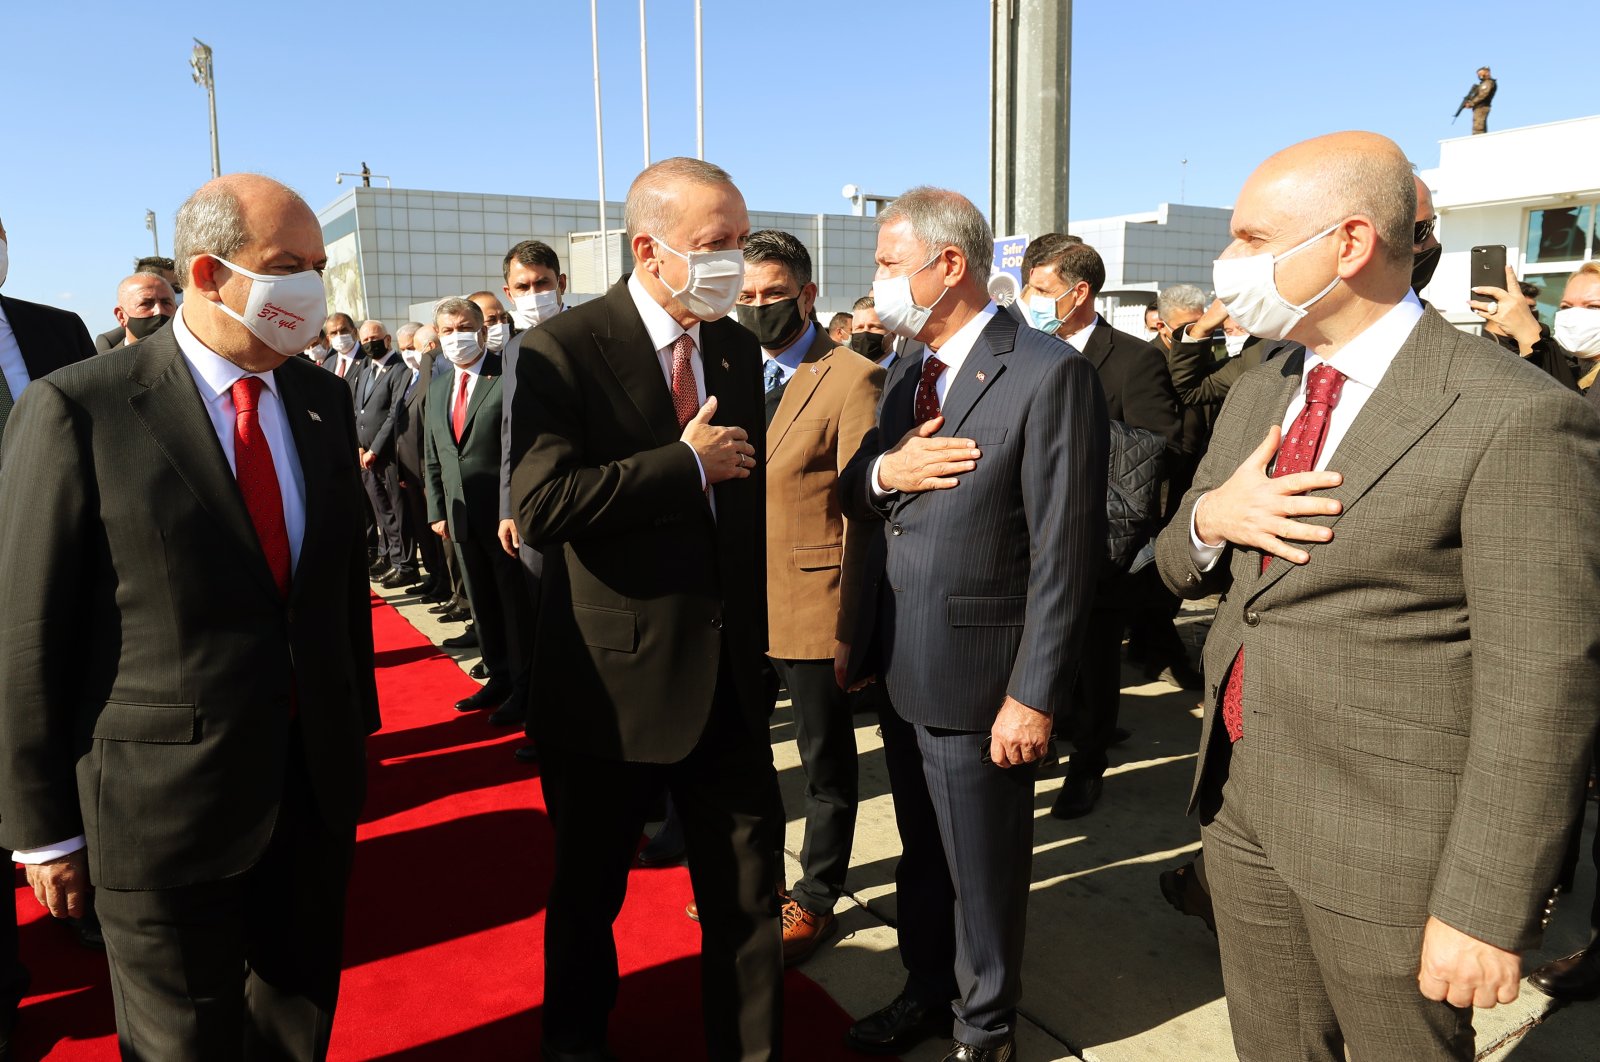 President Recep Tayyip Erdoğan (C) was welcomed by the Turkish Cypriot President Ersin Tatar (L) with an official ceremony in the capital Lefkoşa (Nicosia), the Turkish Republic of Northern Cyprus (TRNC), Nov. 15, 2020. (AA Photo)